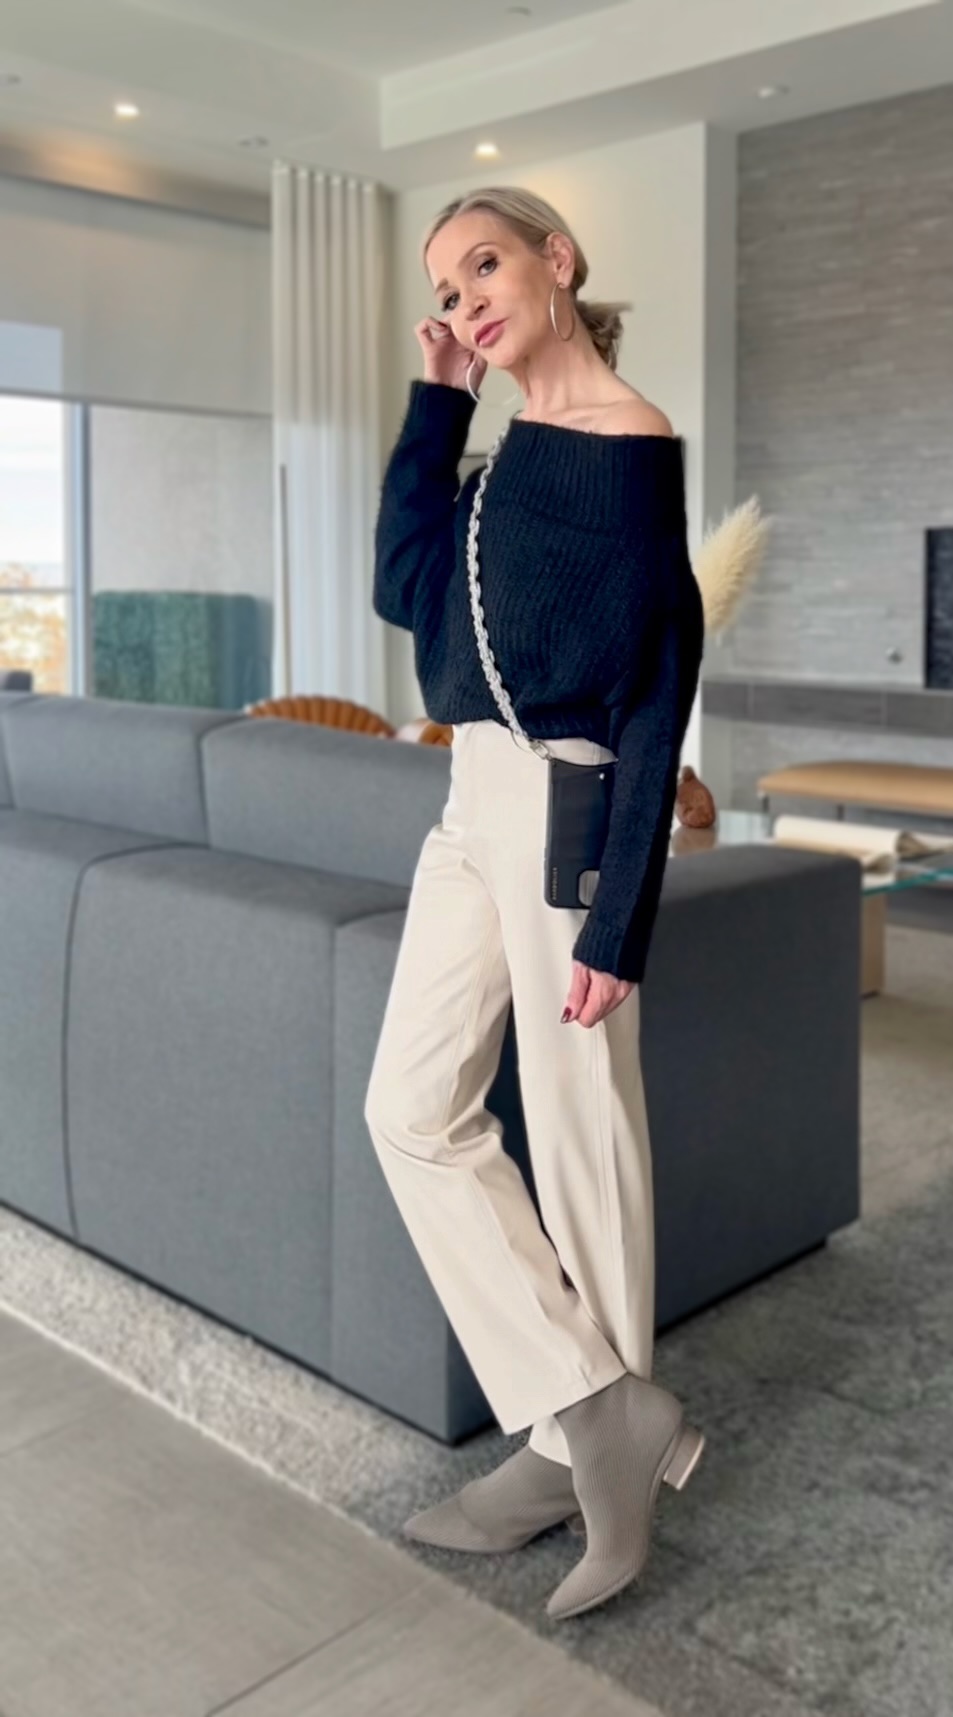 Lifestyle Influencer, Jamie Lewinger of More Than Turquoise with Pashion Footwear storm knit bootie